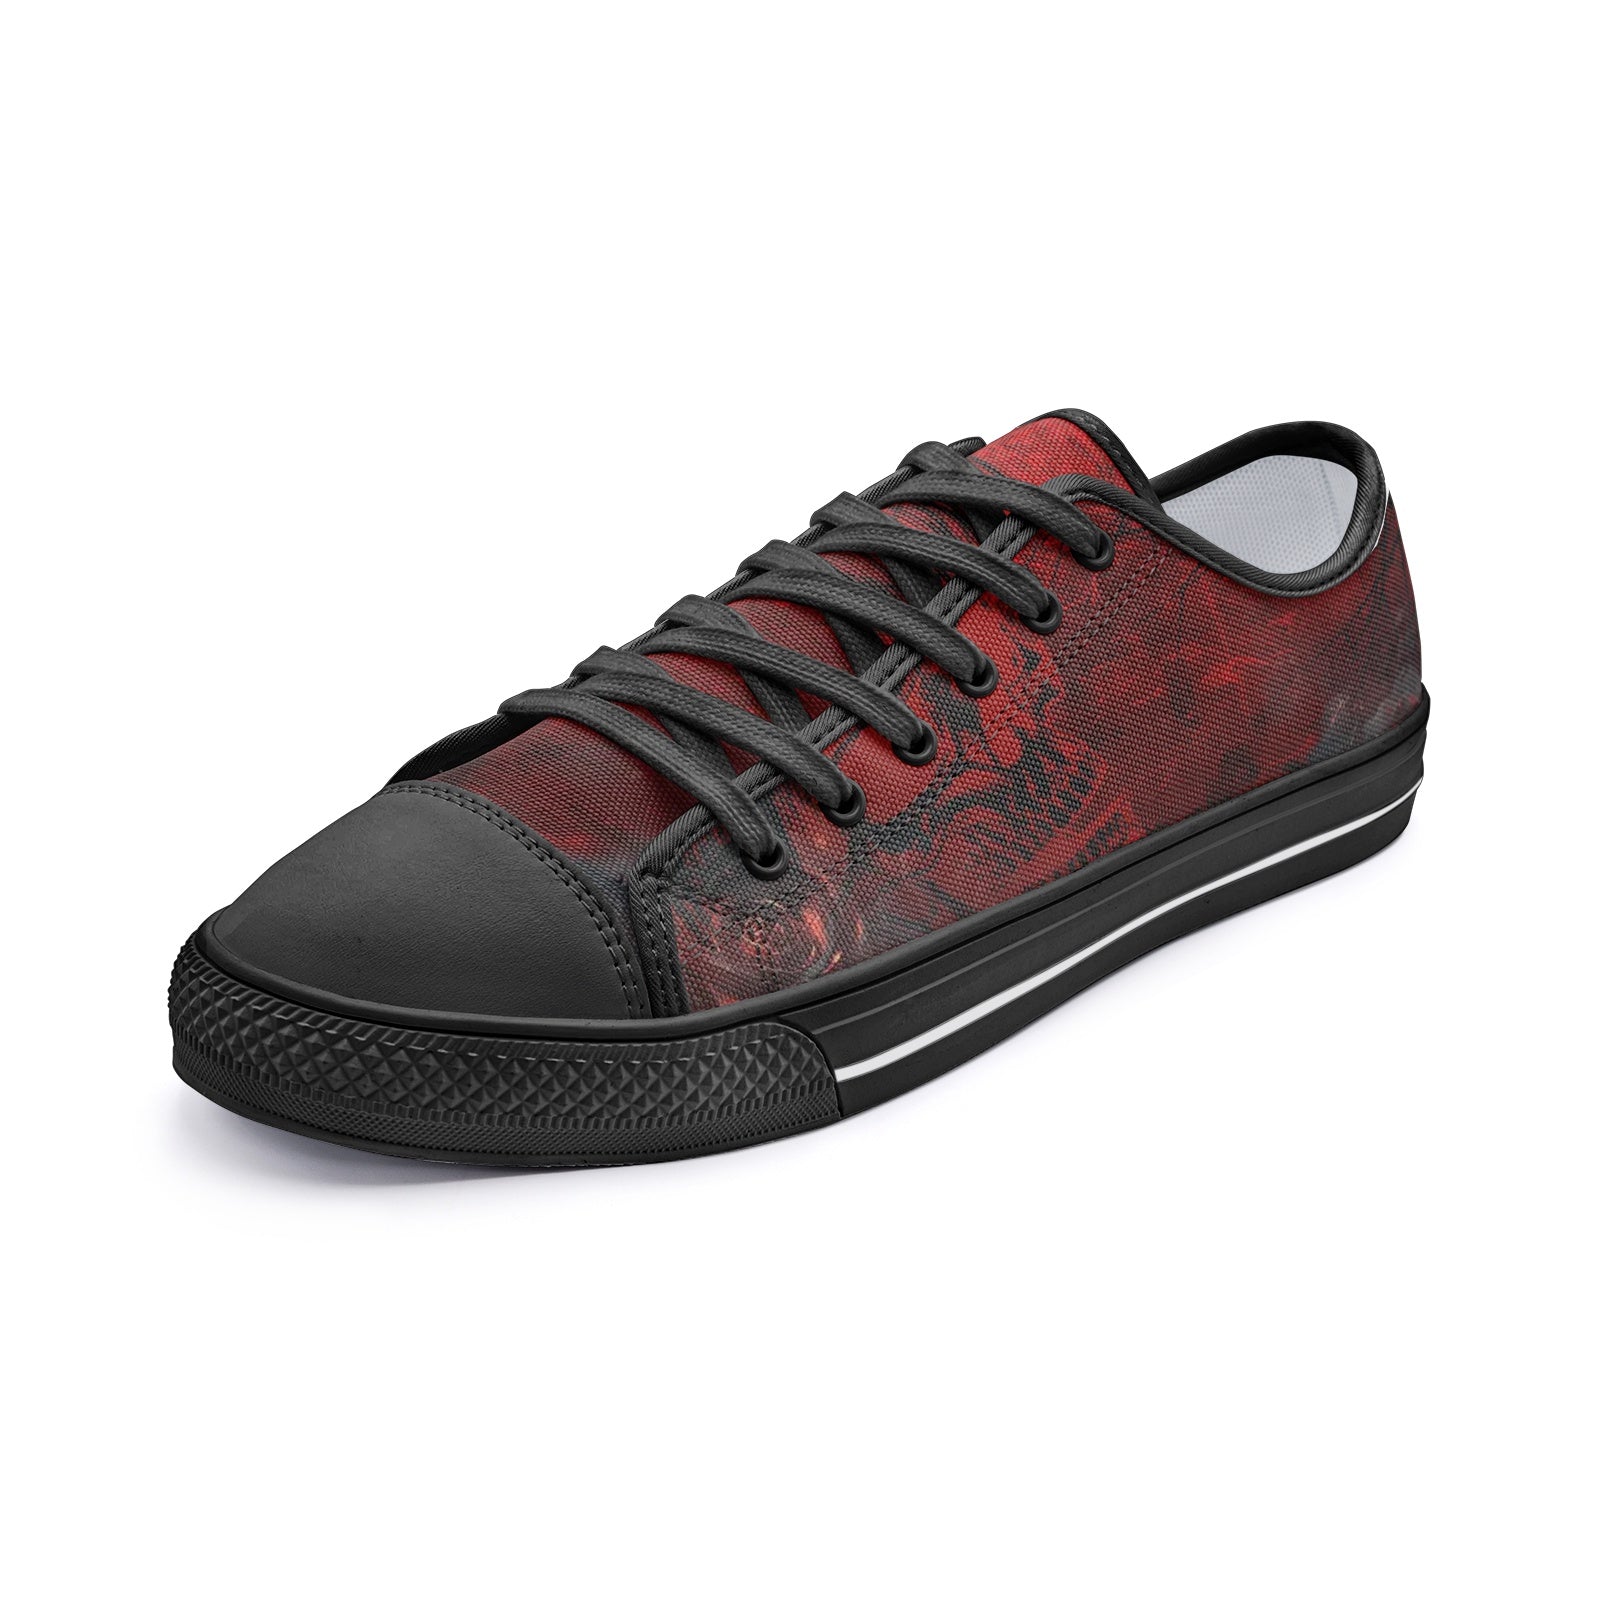 Skull Redish Unisex Low Top Canvas Shoes